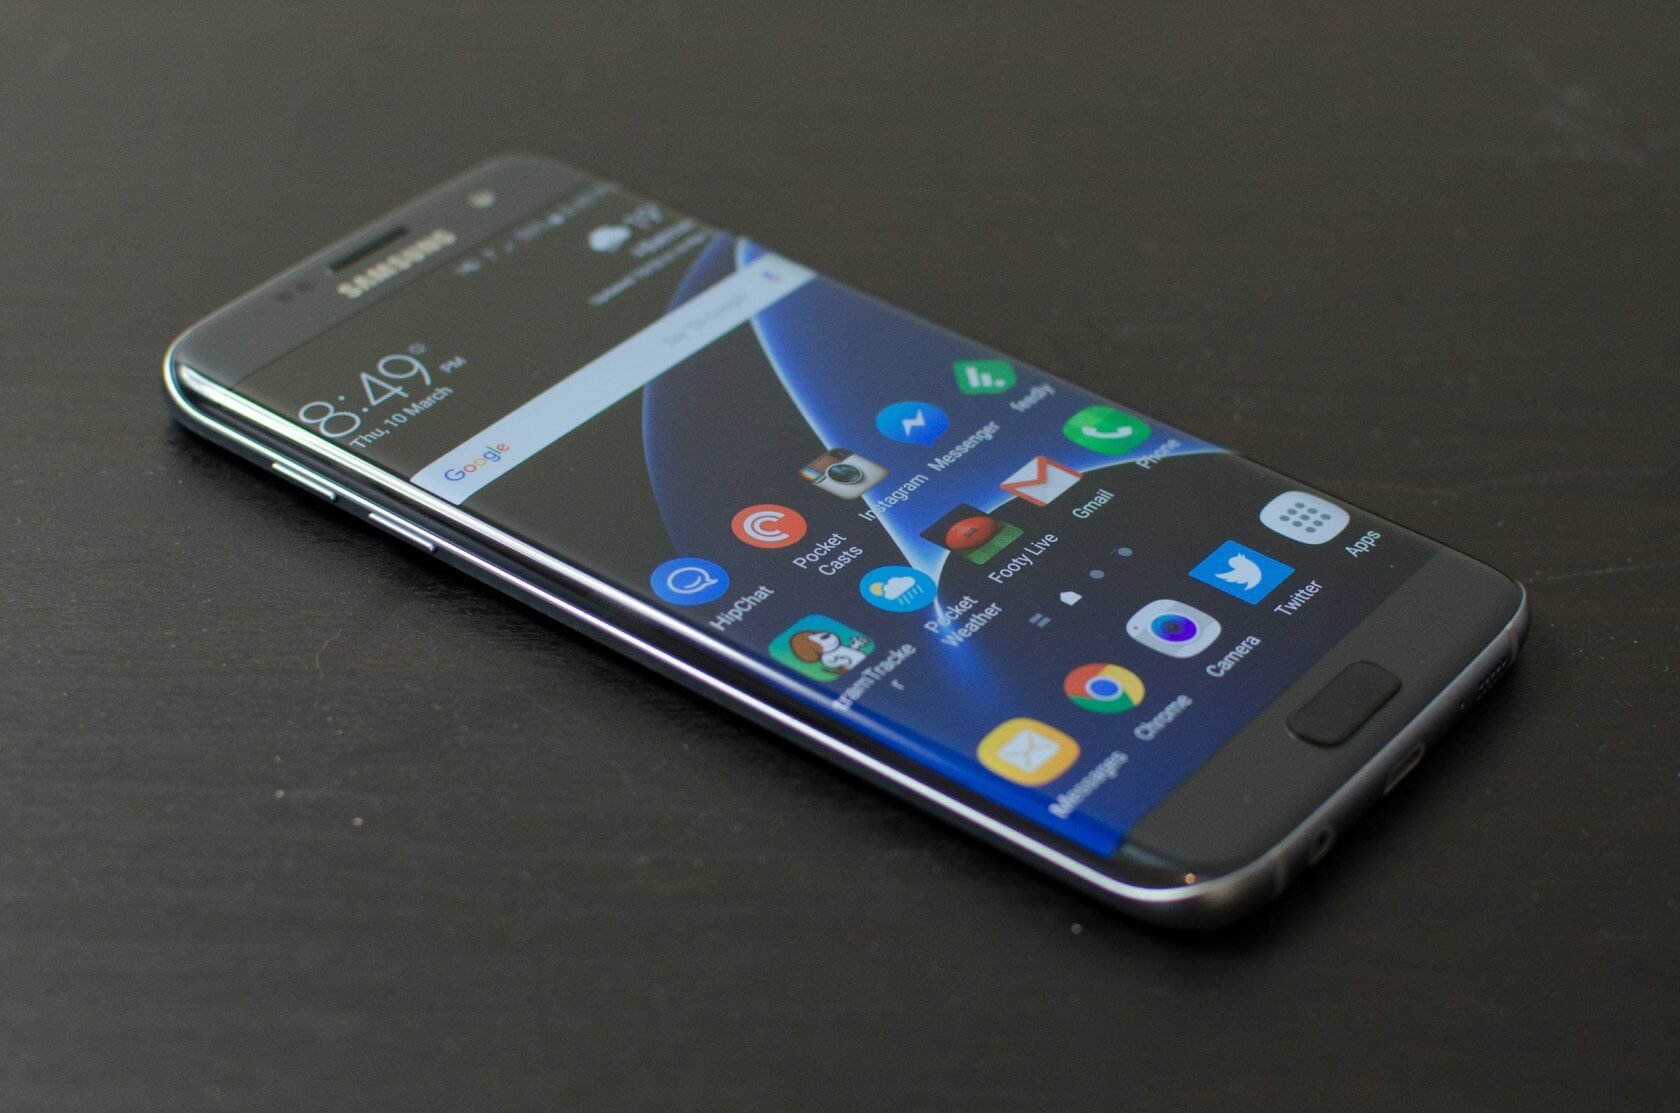 Samsung will reportedly implement a 14-day trial limit on free themes